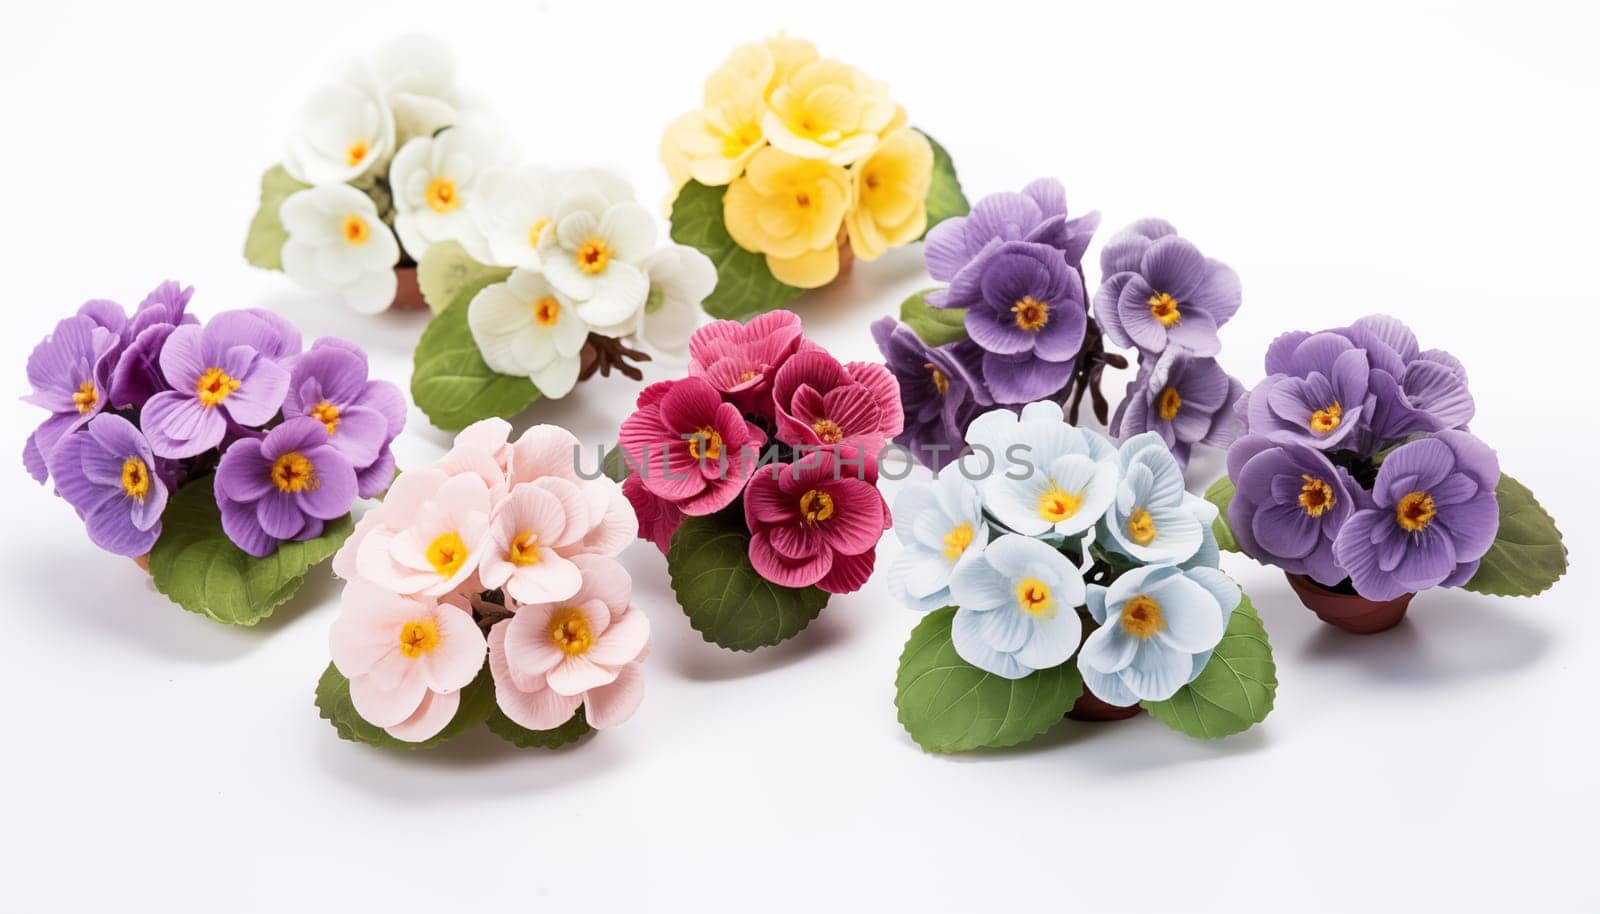 African Violets, isolated, white background. by Nadtochiy